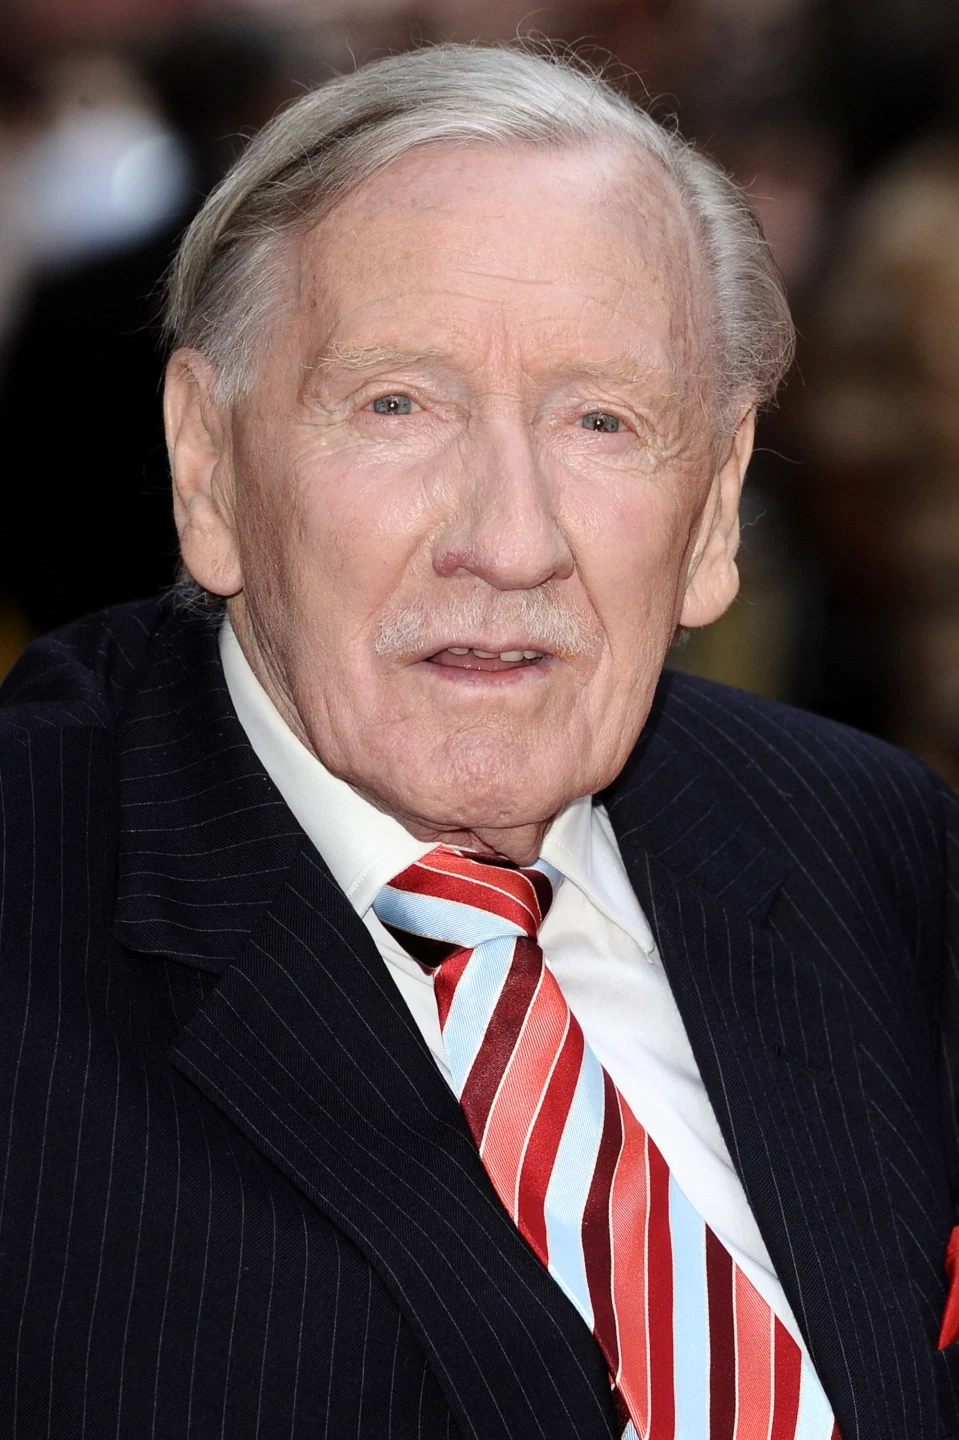 Leslie Phillips, voice of Sorting Hat in